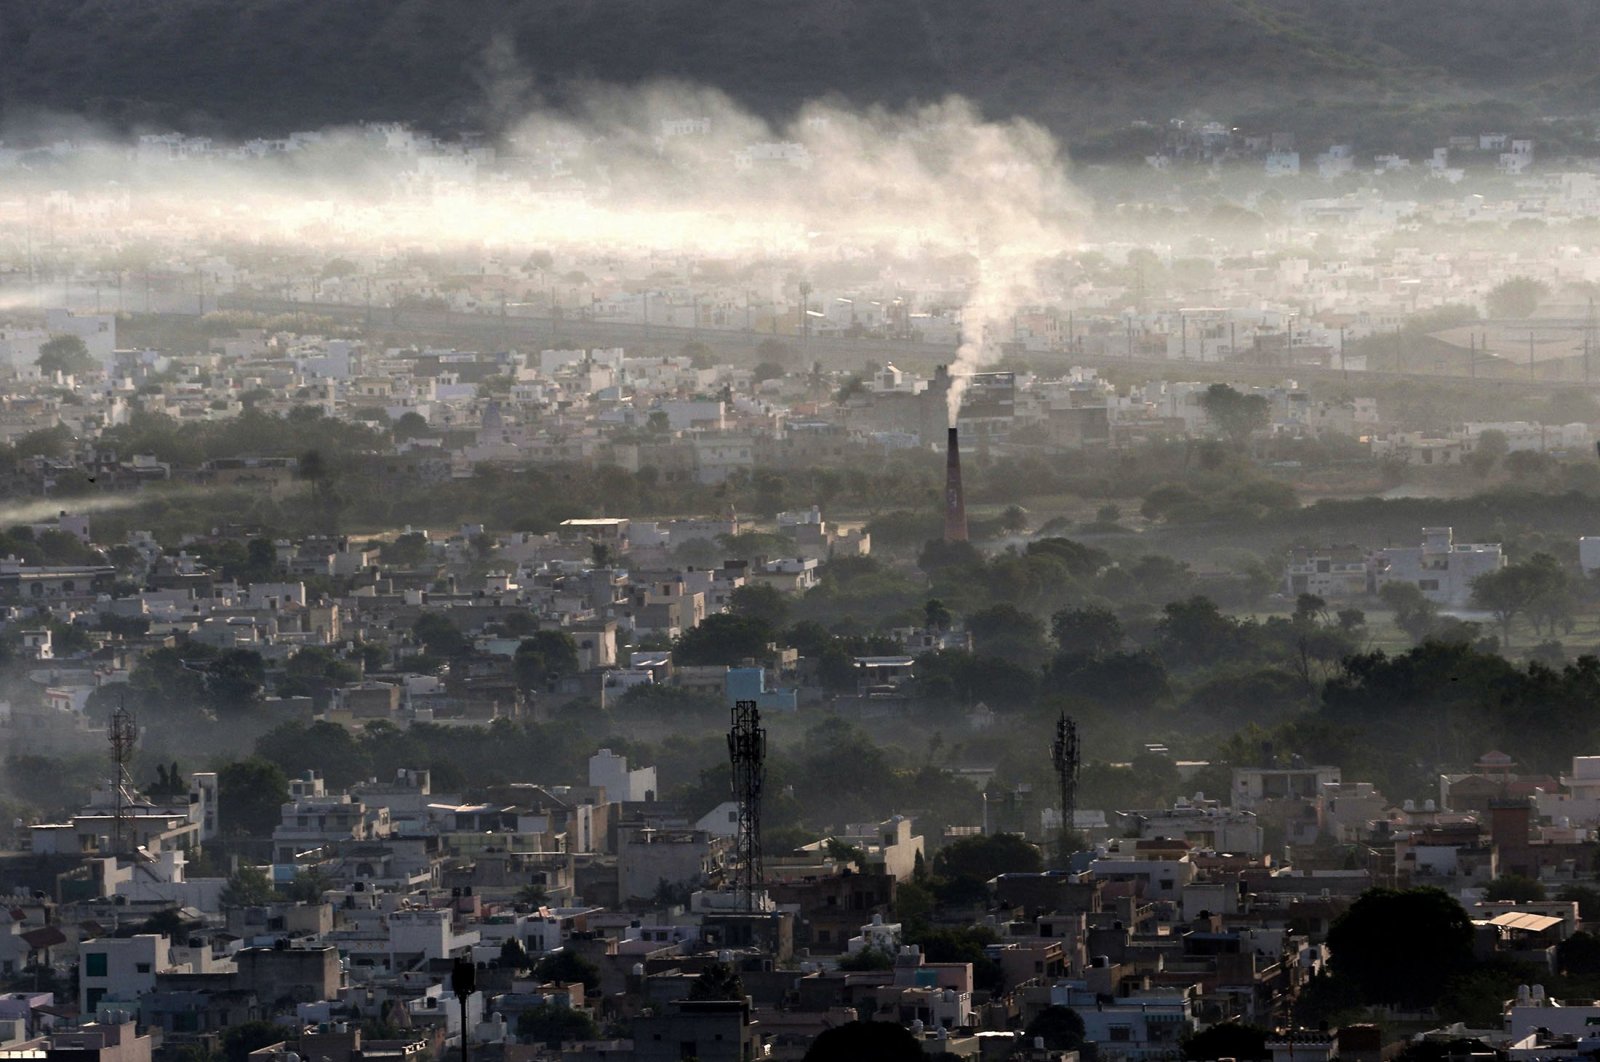 Smoke billows from a factory chimney during a smoggy morning in Ajmer, northern India on November 2, 2020. (AFP Photo)